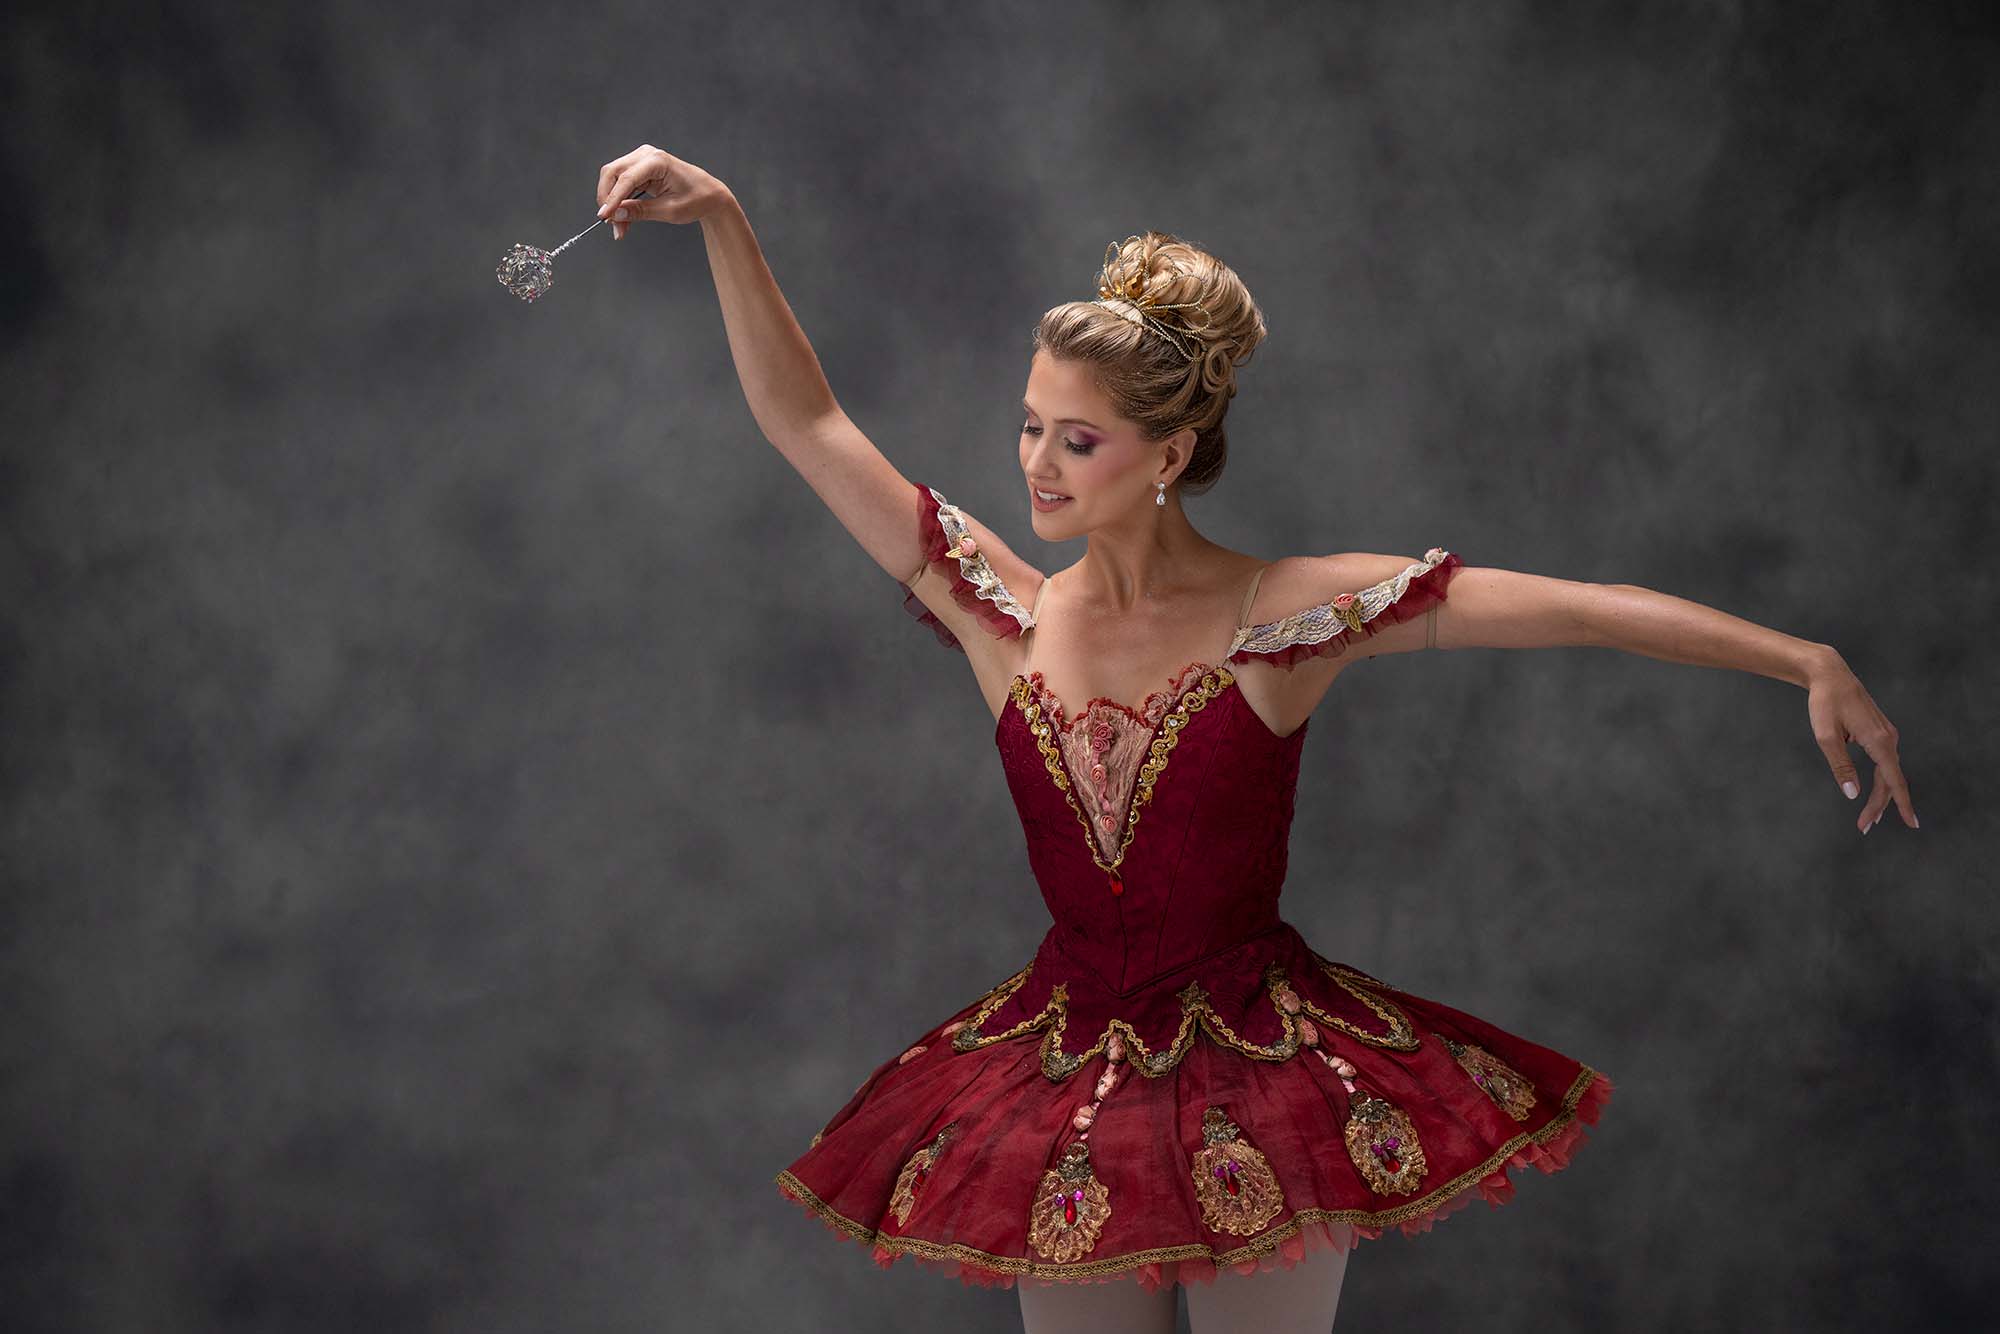 Against a hazy grey backdrop, a smiling dancer poses in a crimson classical tutu with gold trim. Her right arm is raised and points a delicate wand down and out; her gaze follows it. Her left arm is extended in second position. She wears a delicate tiara that frames her voluminous blonde bun.